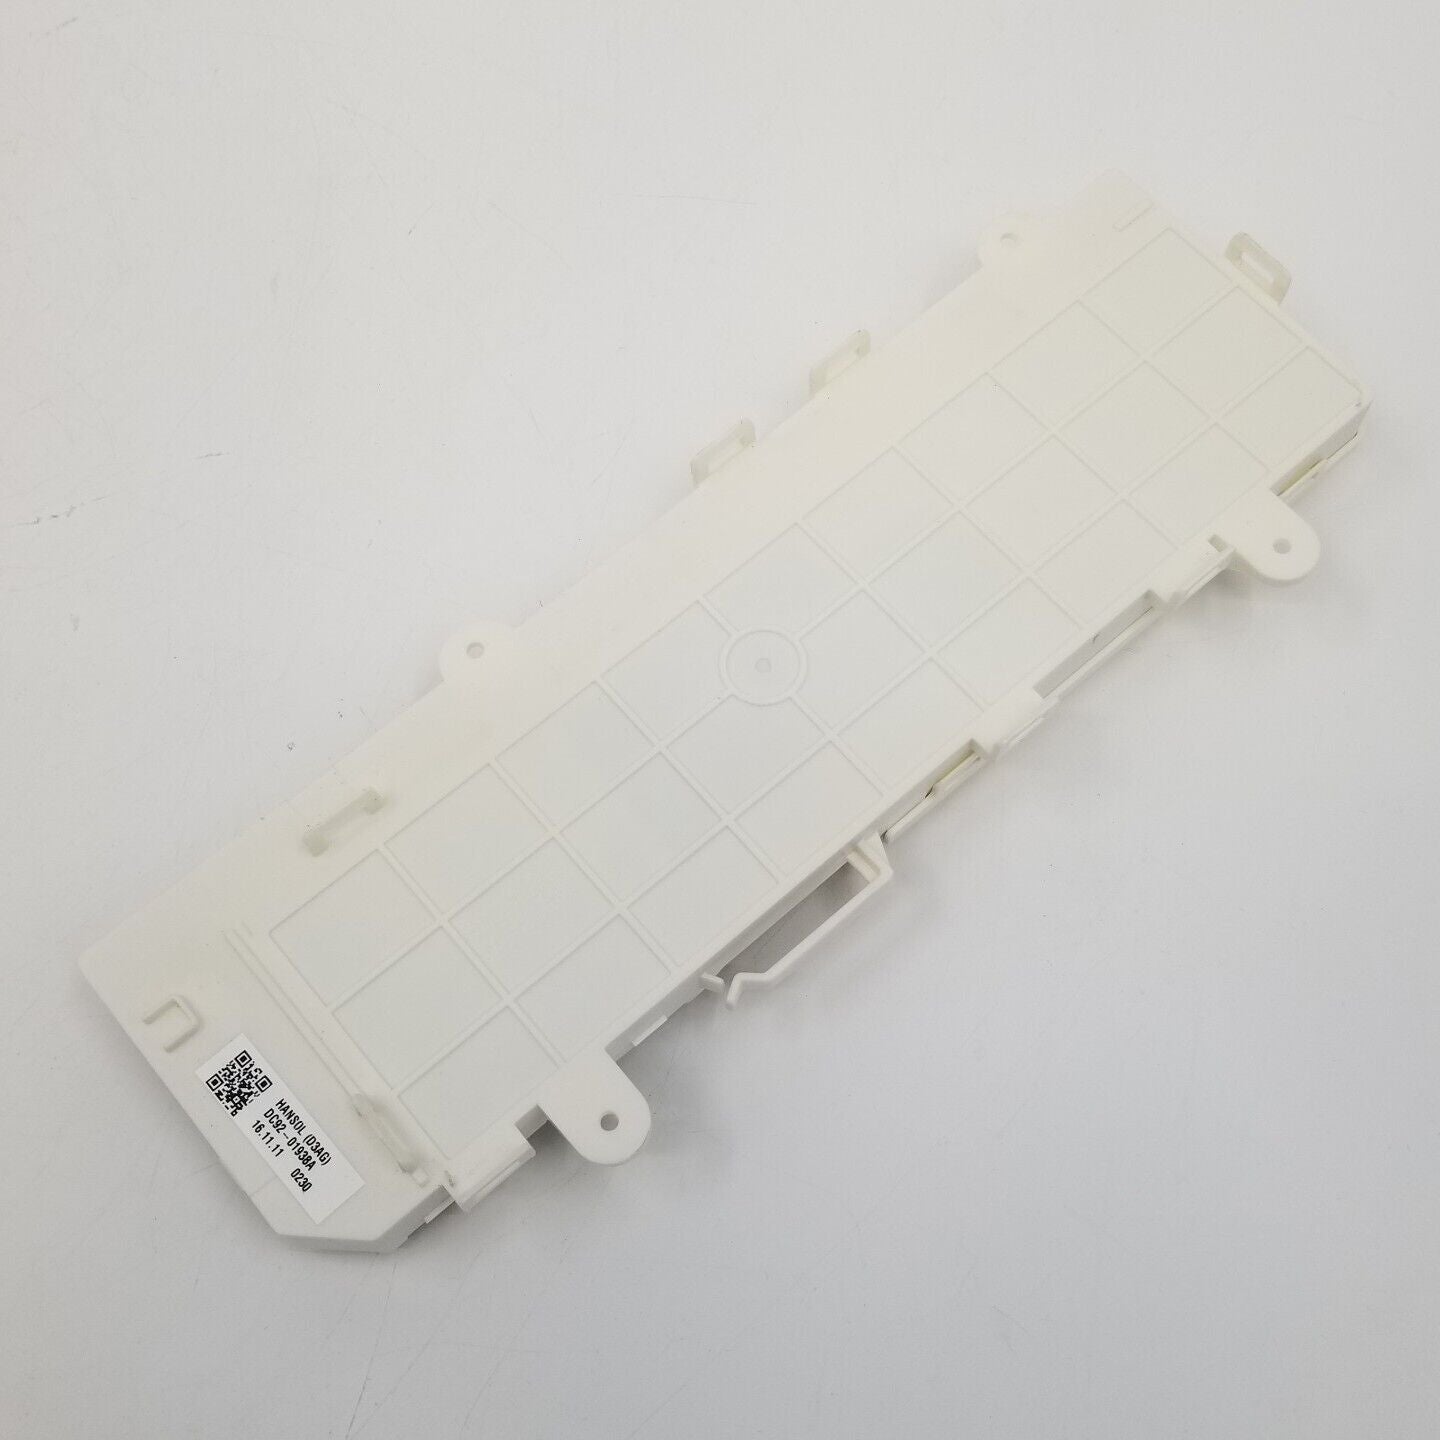 Genuine OEM Replacement for Samsung Washer Control DC92-01624L